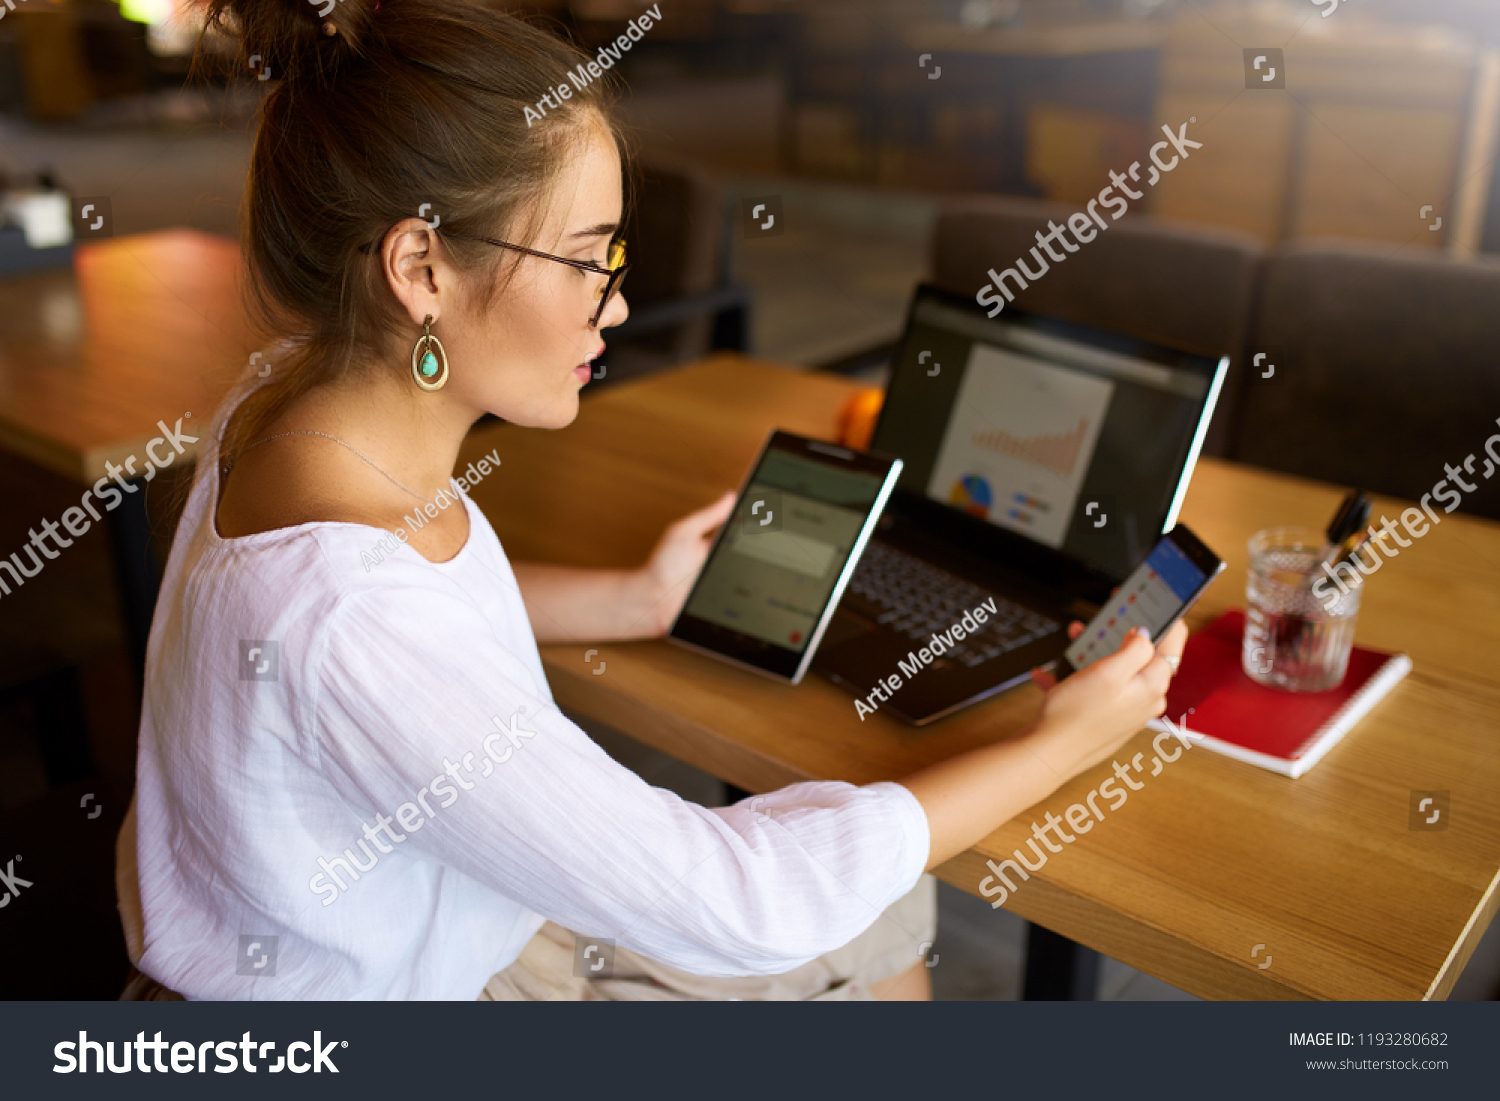 Mixed race woman in glasses working with multiple electronic internet devices. Freelancer businesswoman has tablet and cellphone in hands and laptop on table with charts on screen. Multitasking theme